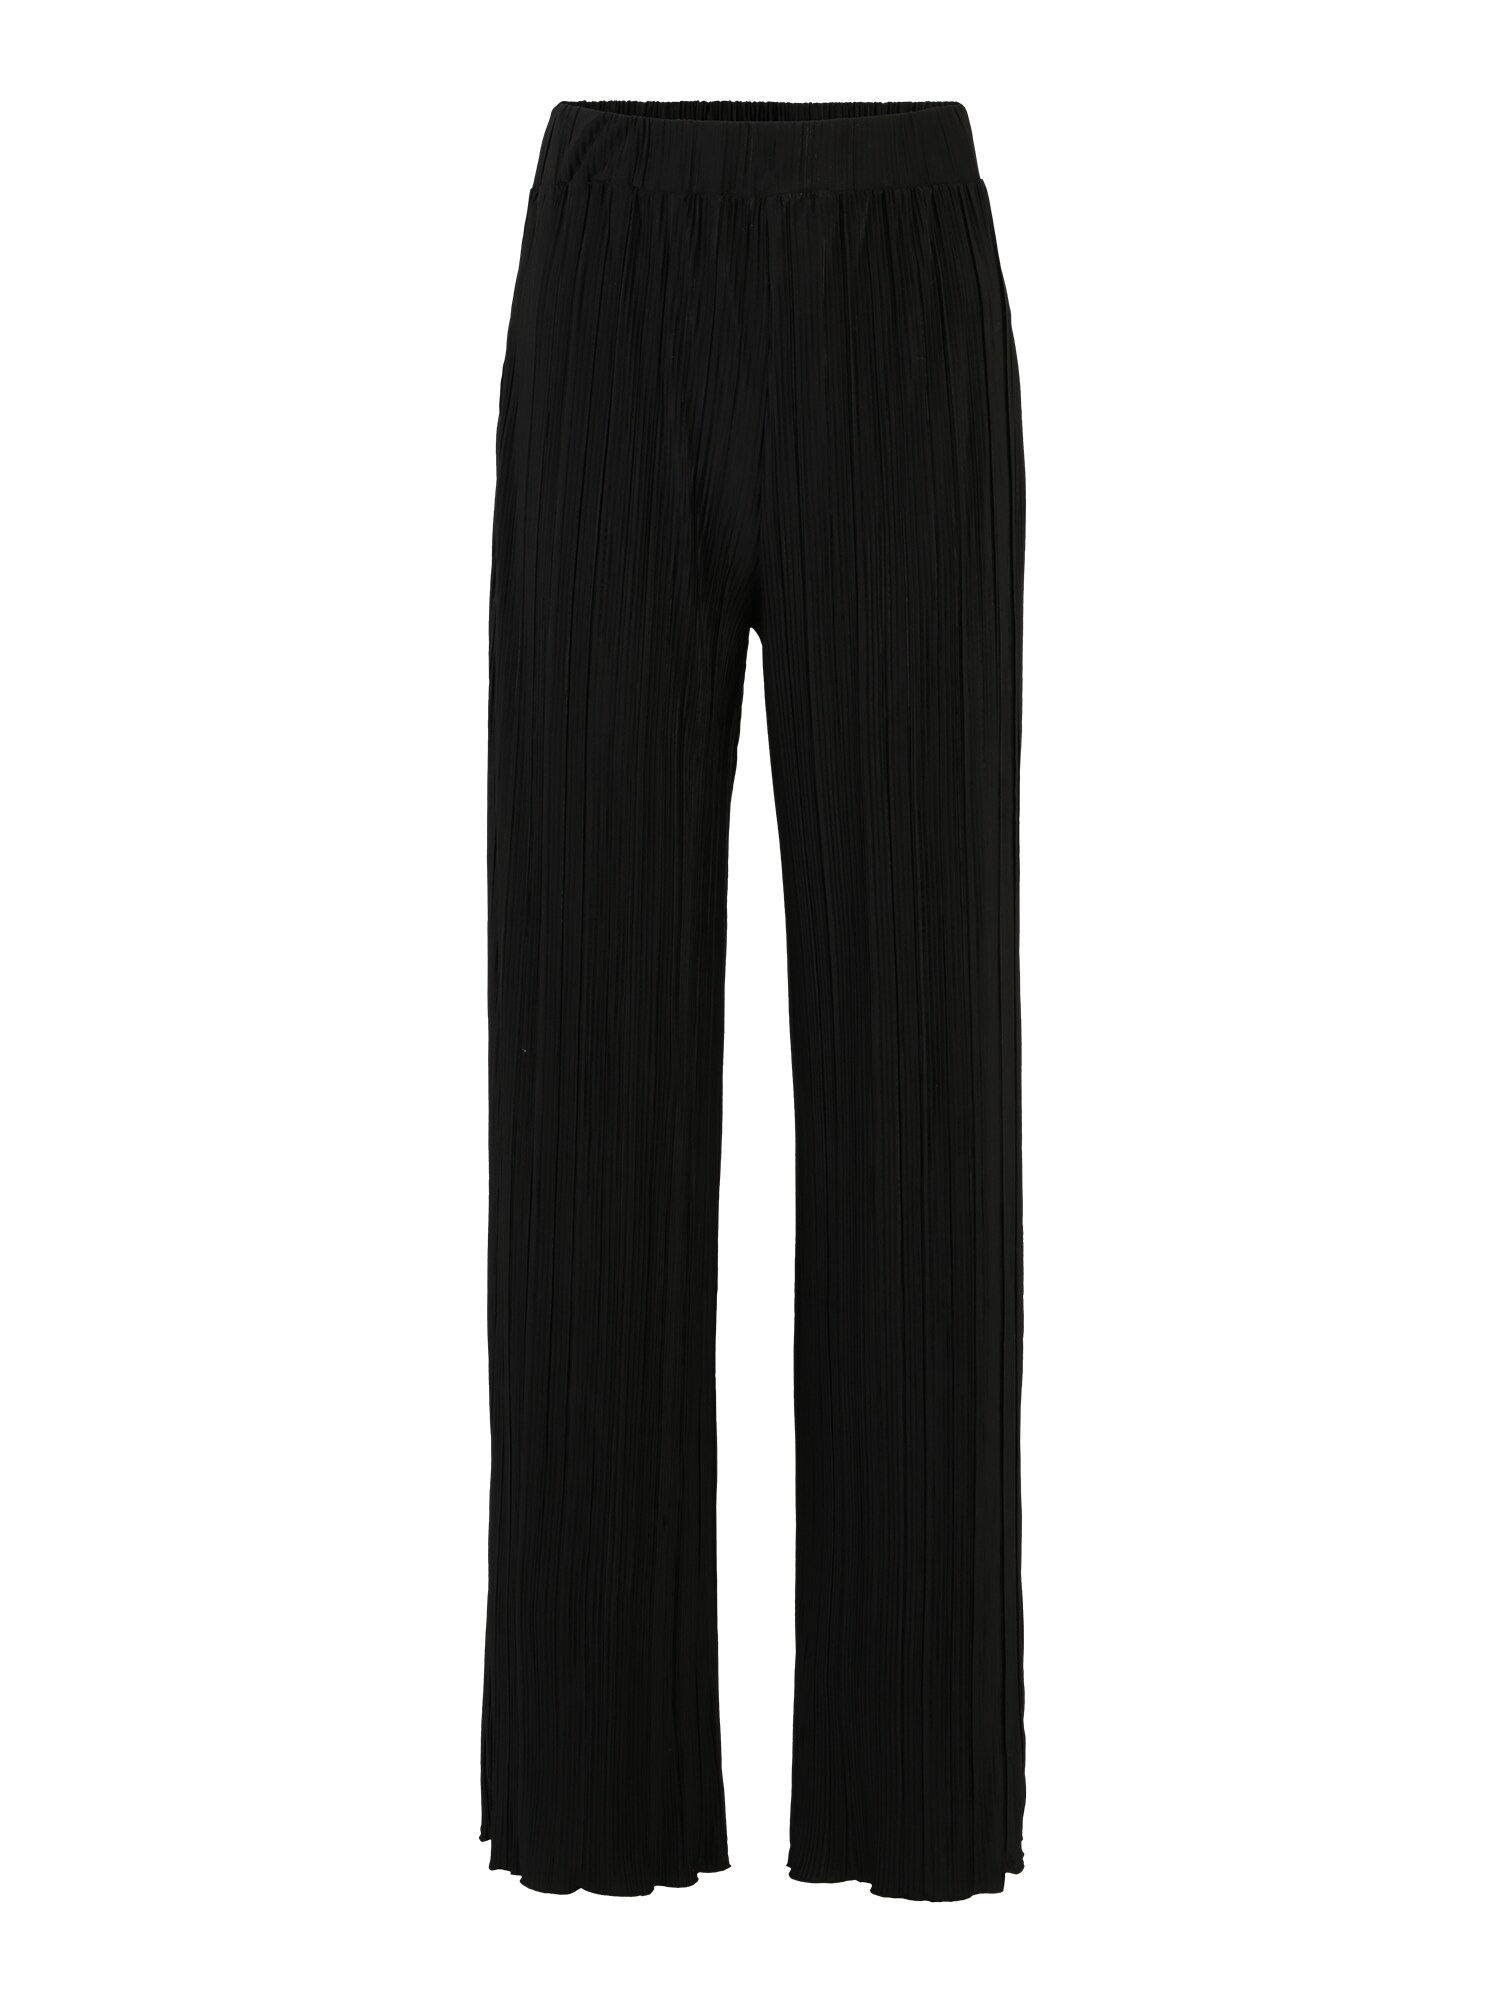 Selected Femme Tall, 40/36